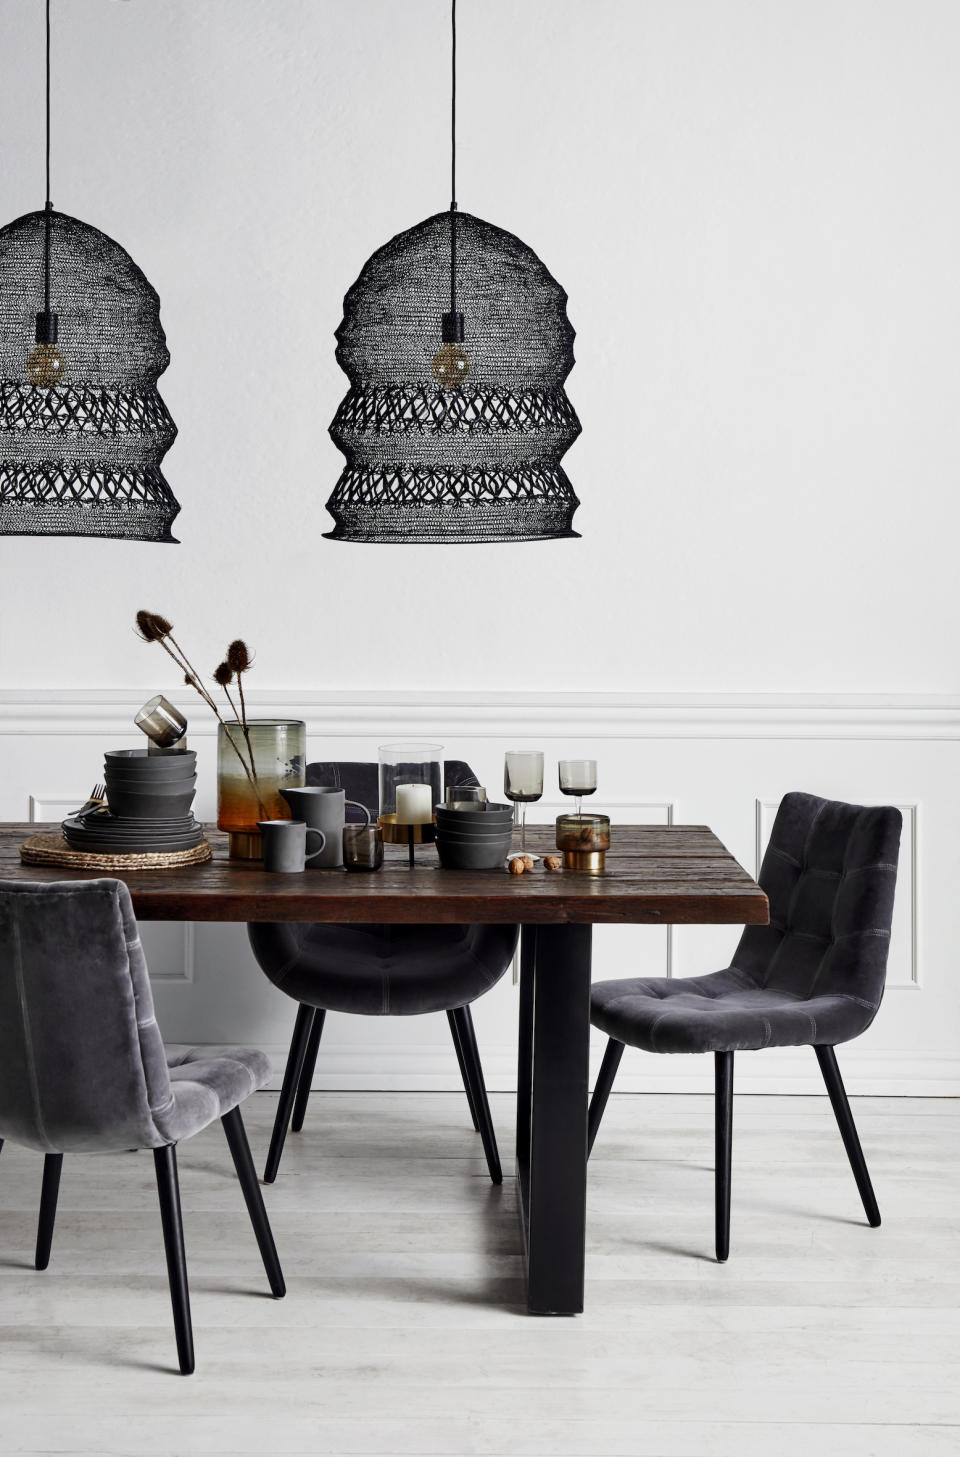 <p> Kitchens tend to benefit from plenty of natural light, so make a great space in the home to try out an atmospheric dark scheme or the latest kitchen trend.&#xA0; </p> <p> A dark pendant light is a great way to create a graphic contrast in your dining space &#x2013; and if you find that it doesn&apos;t work, after all, pendants are easy to replace. Choose an organic-inspired mesh design for added texture.&#xA0; </p>